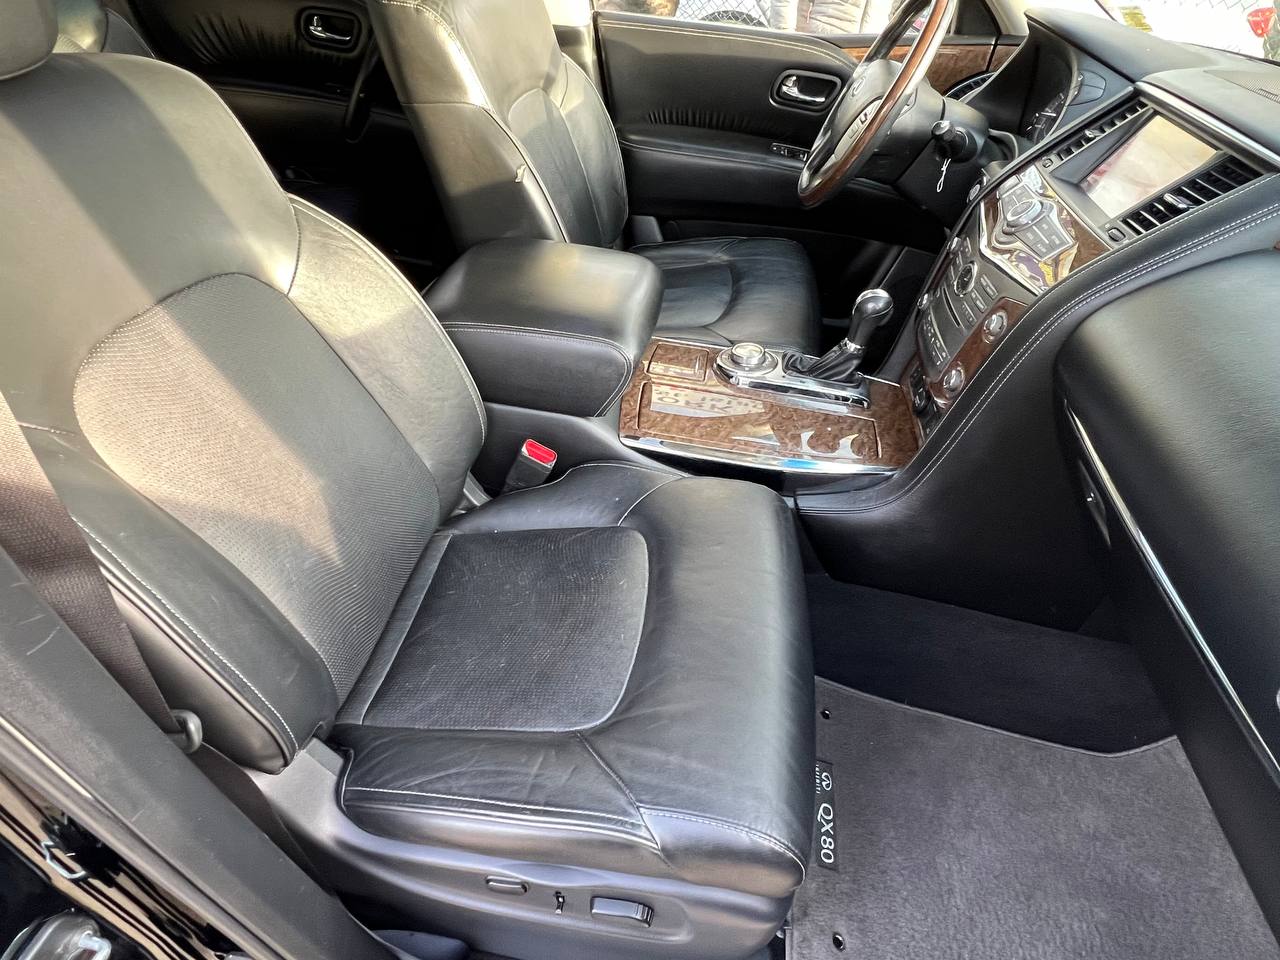 Used - Infiniti QX80 AWD SUV for sale in Staten Island NY